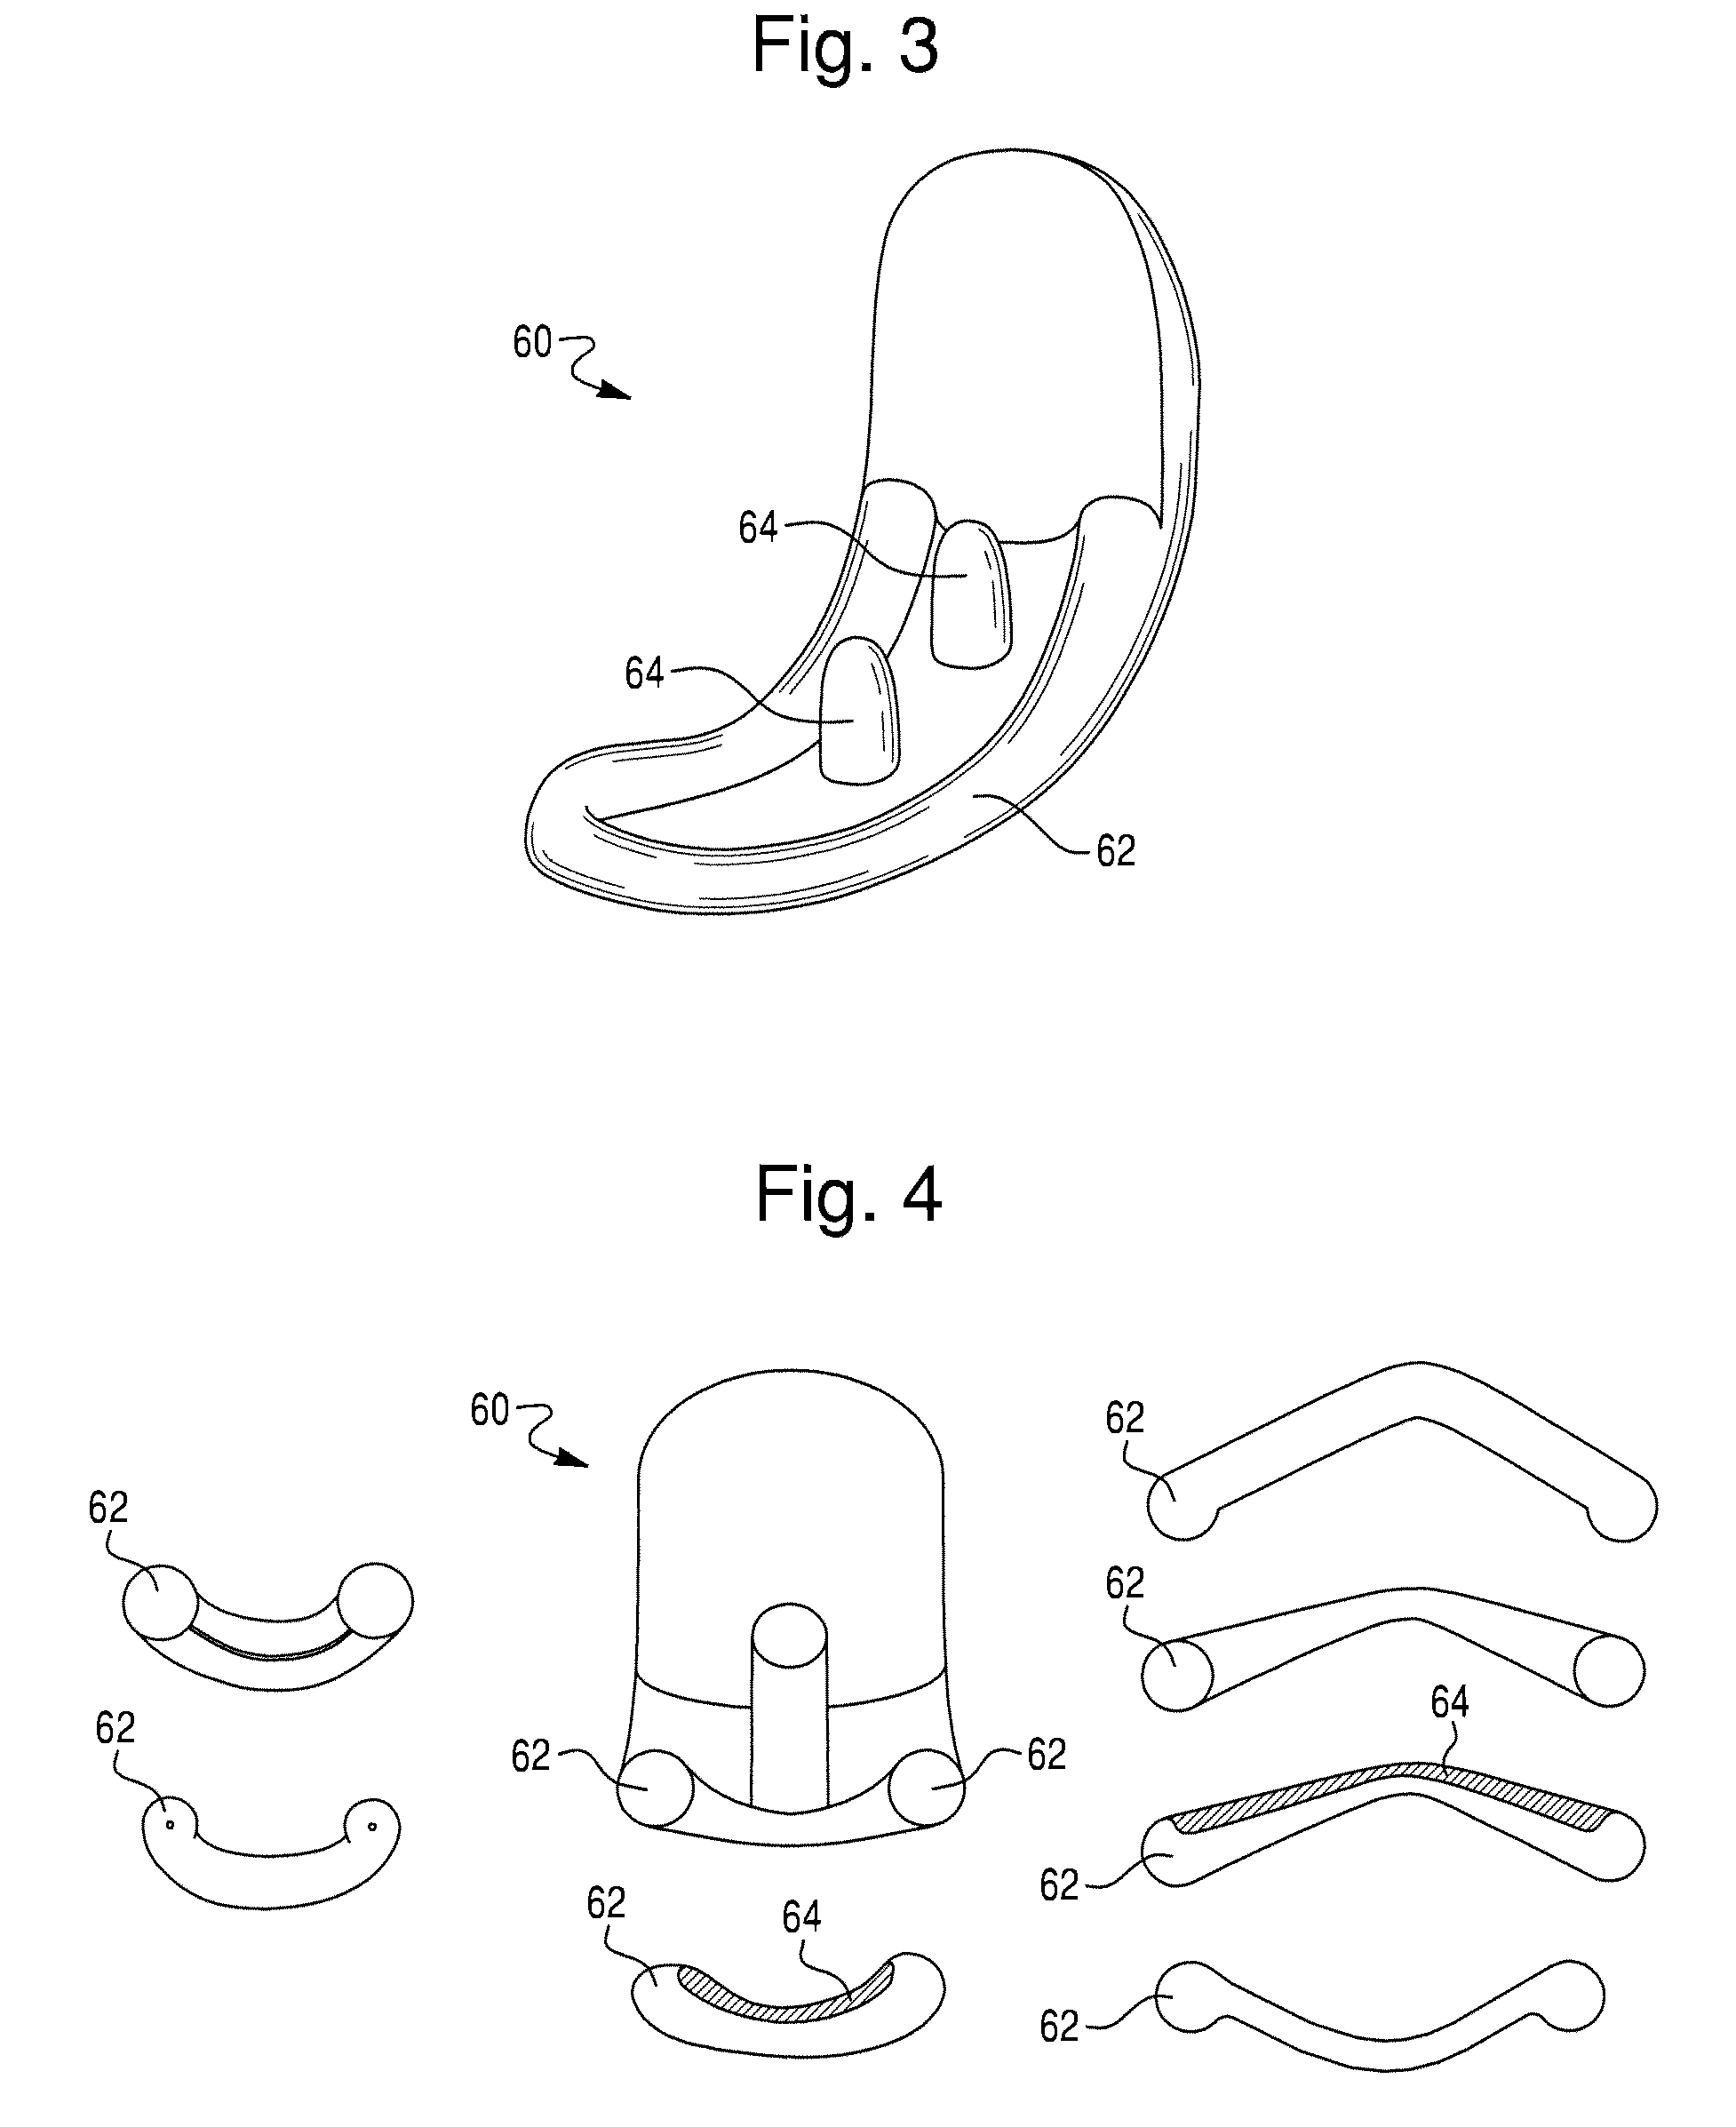 Prosthetic device for knee joint and methods of implanting and removing same